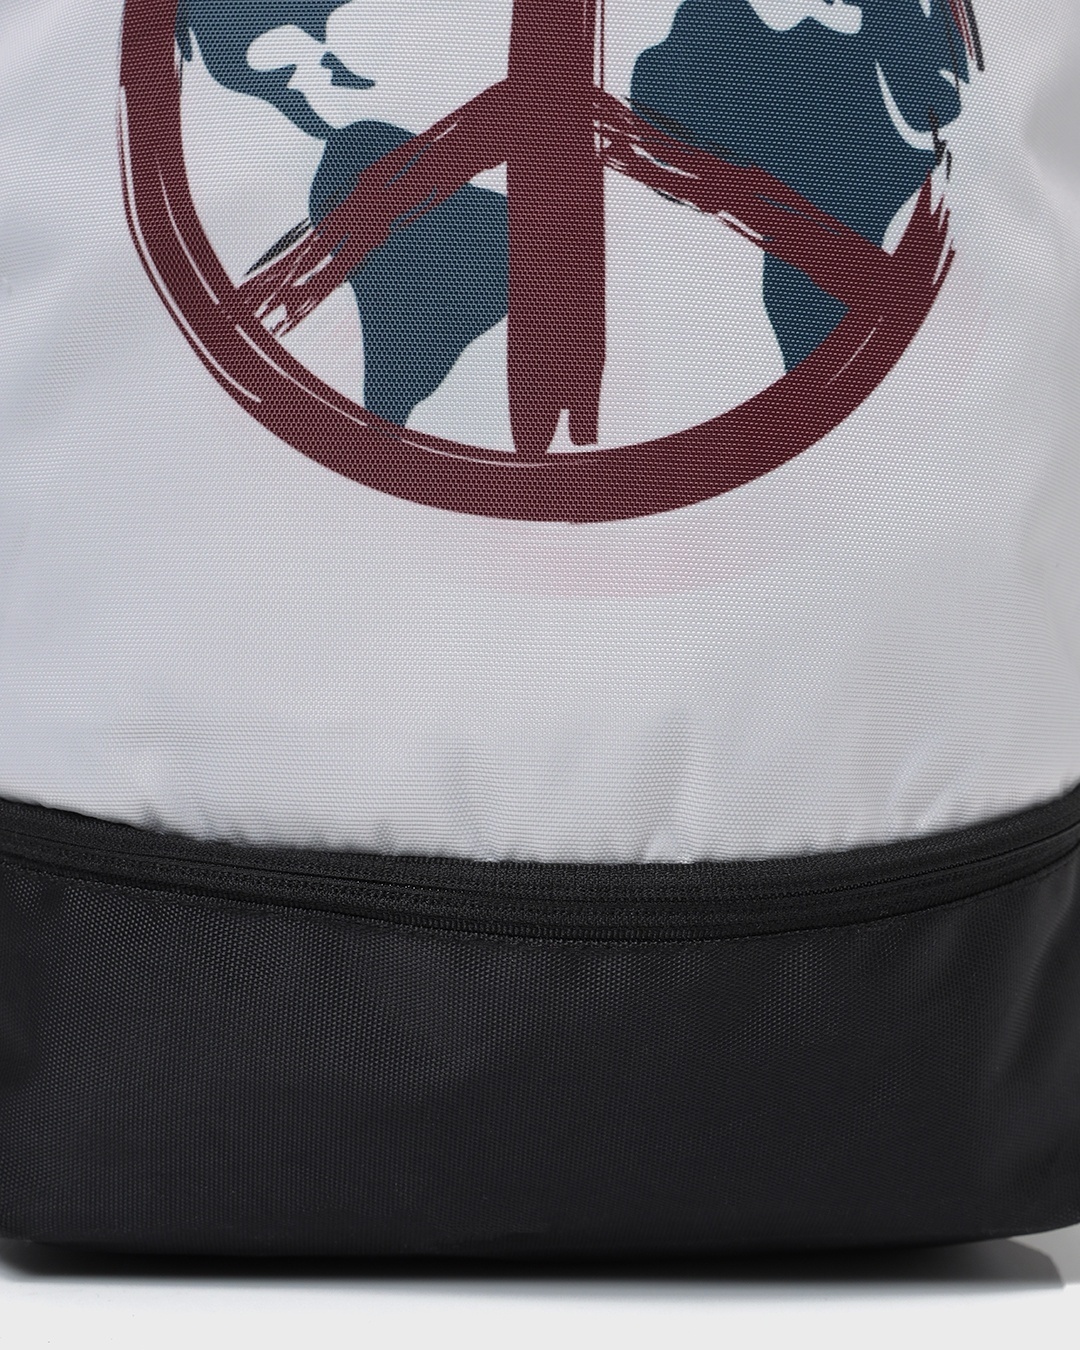 Shop World Peace Small Backpack